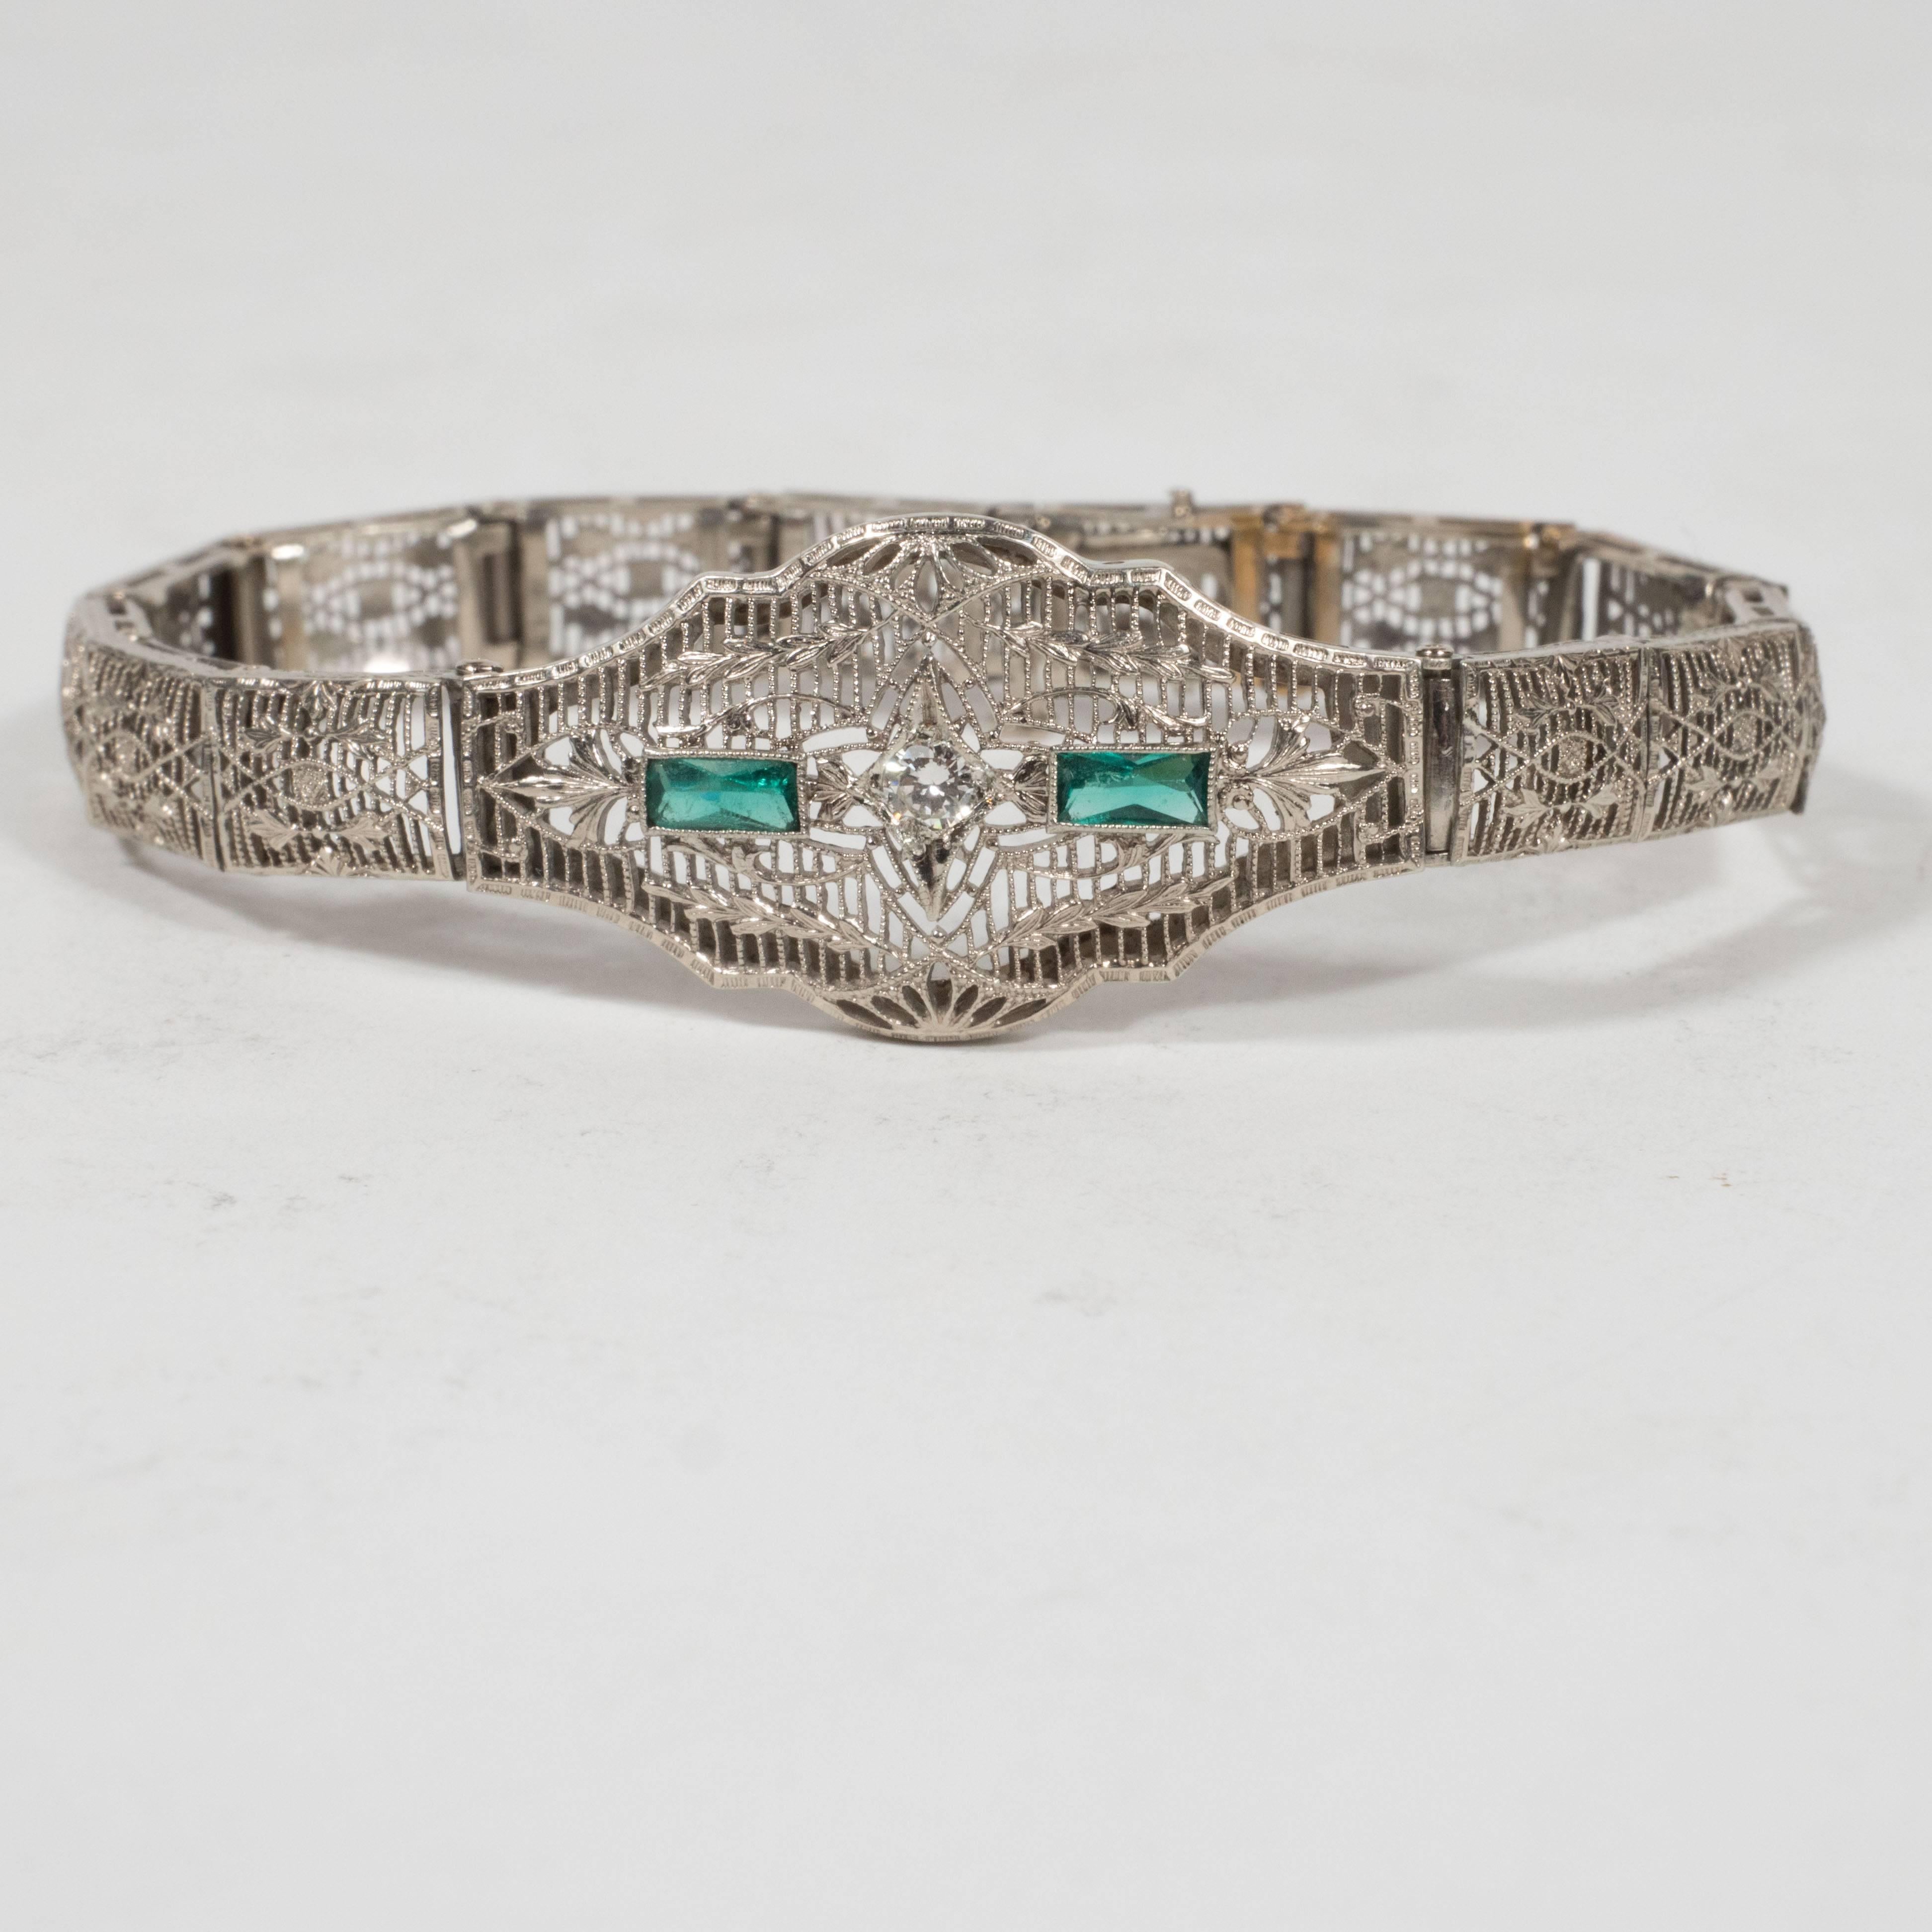 This gorgeous Art Deco bracelet features a central ten point brilliant white diamond placed in a star shaped setting which is flanked by two step cut synthetic emeralds on either side, weighing a total of 30 points. A the top and bottom of the